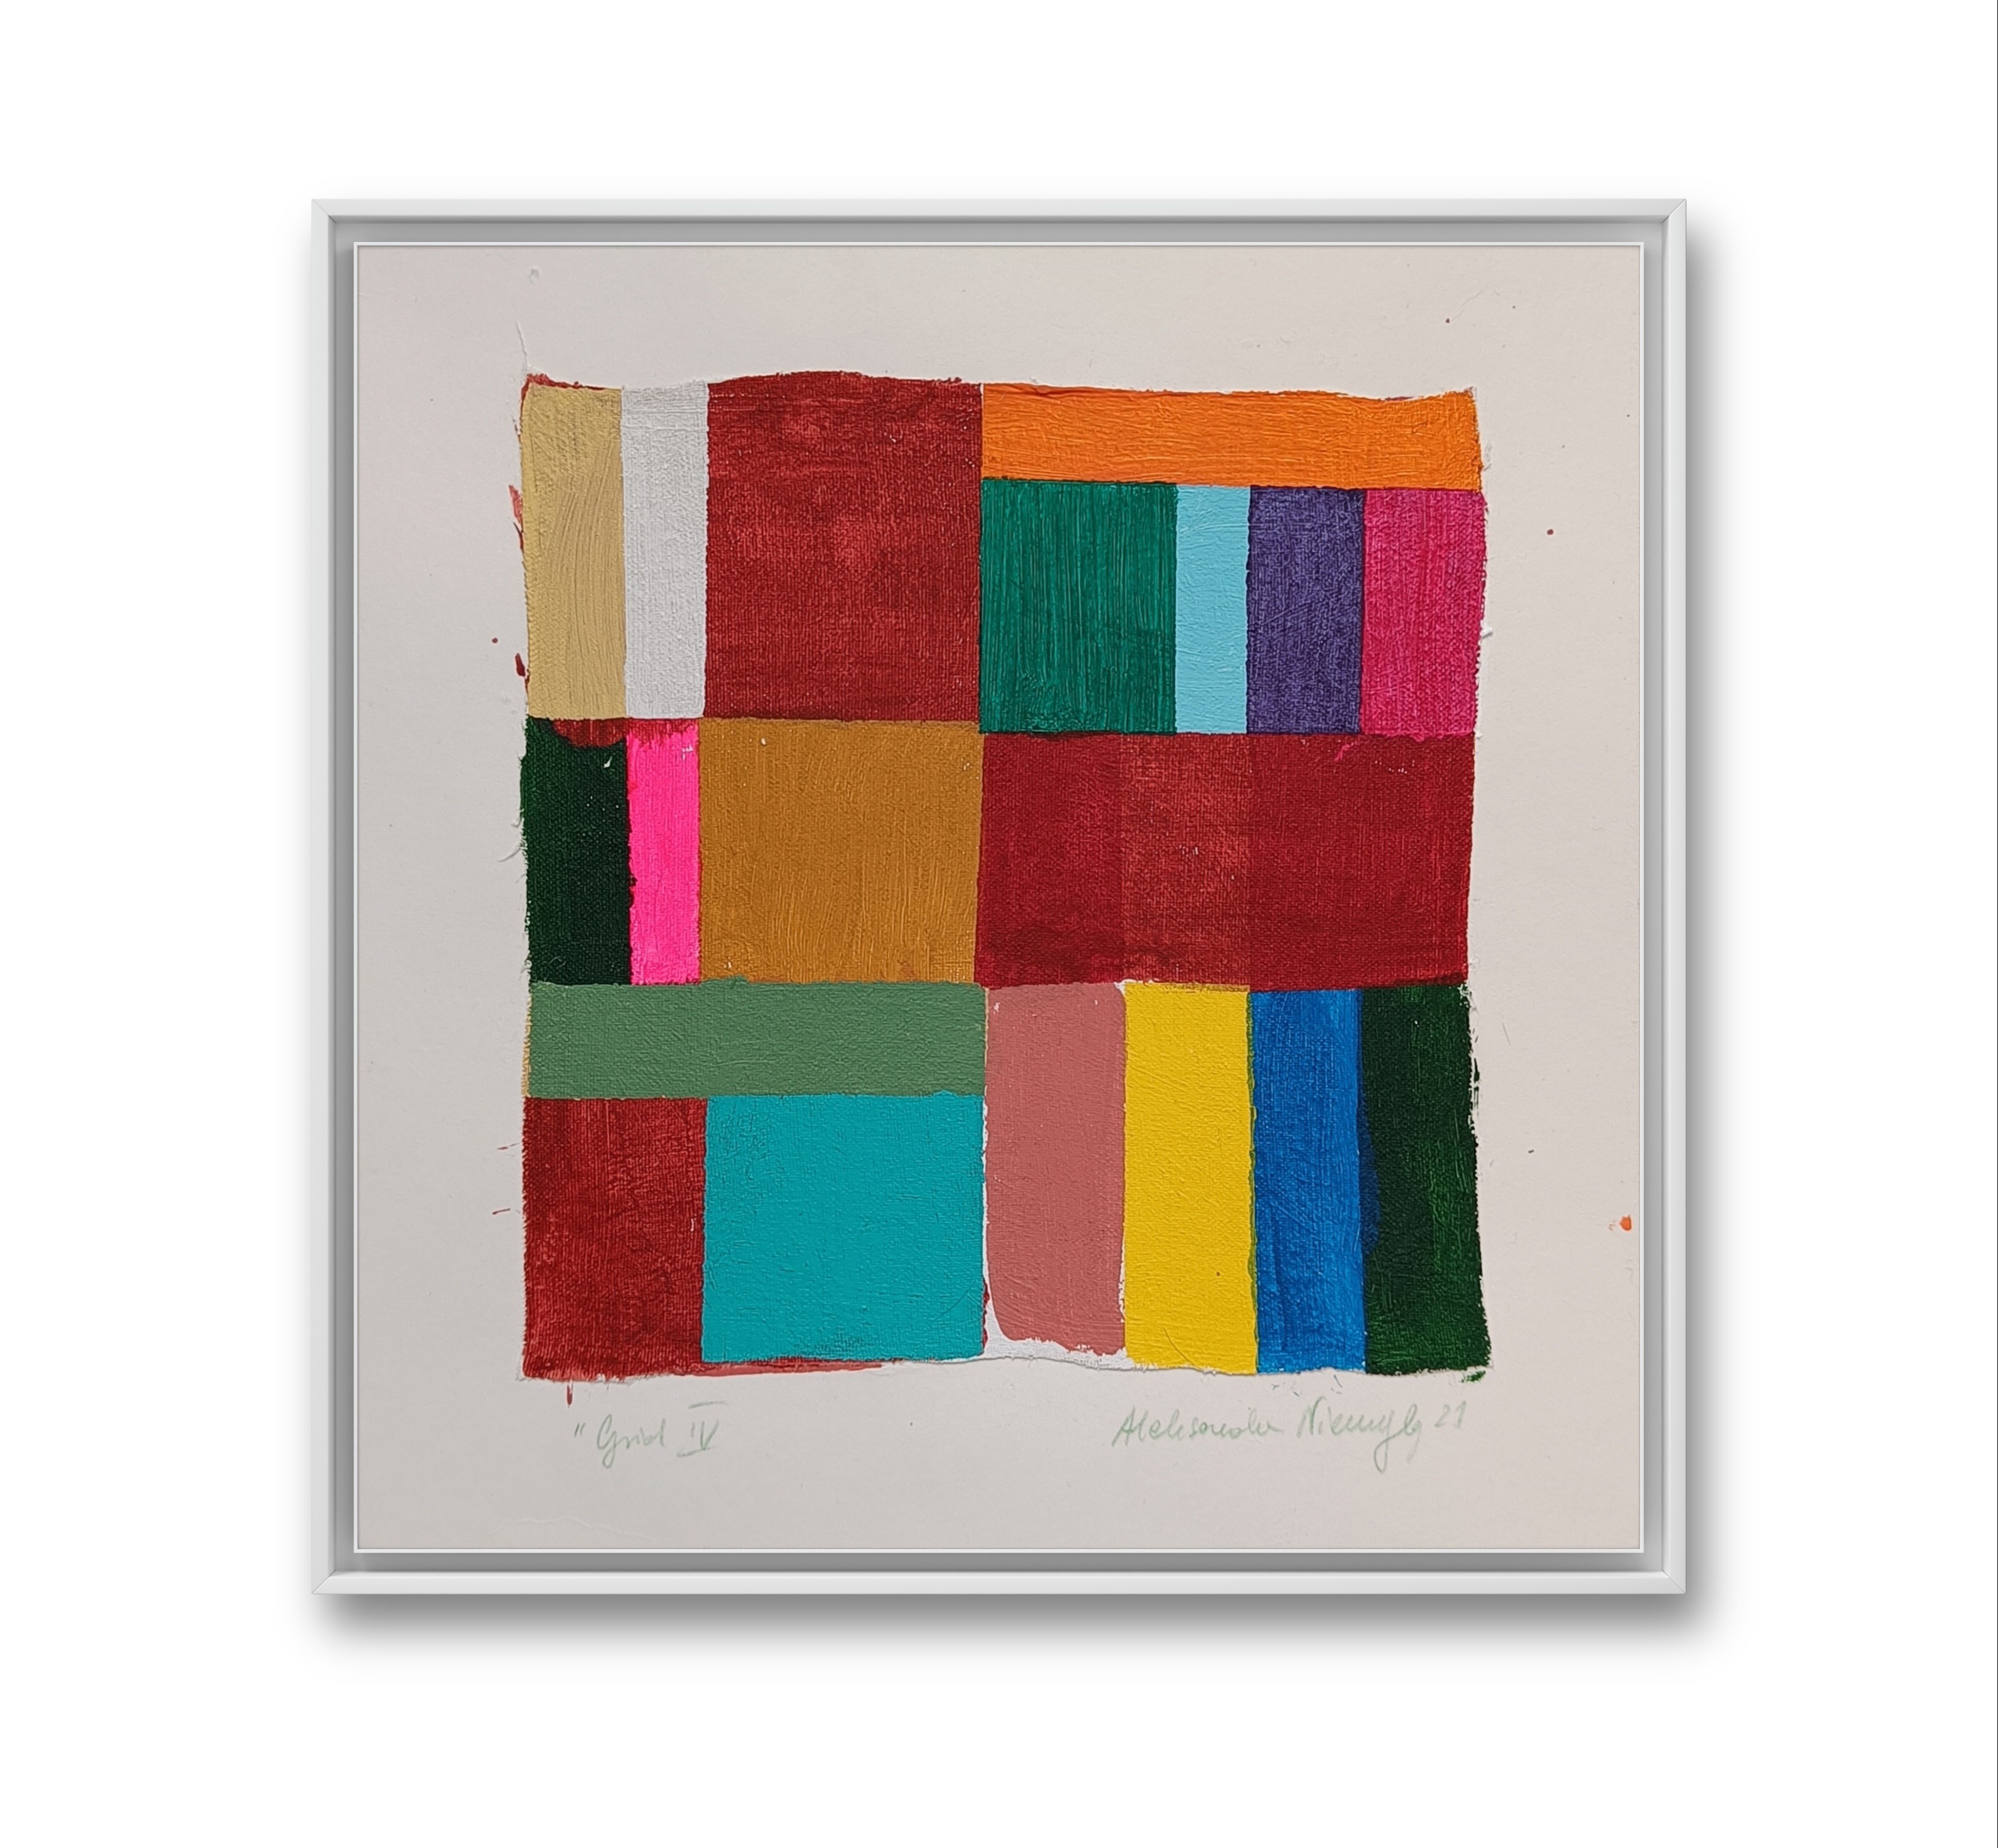 "Square rainbows", 20x20cm, painting on paper, framing example